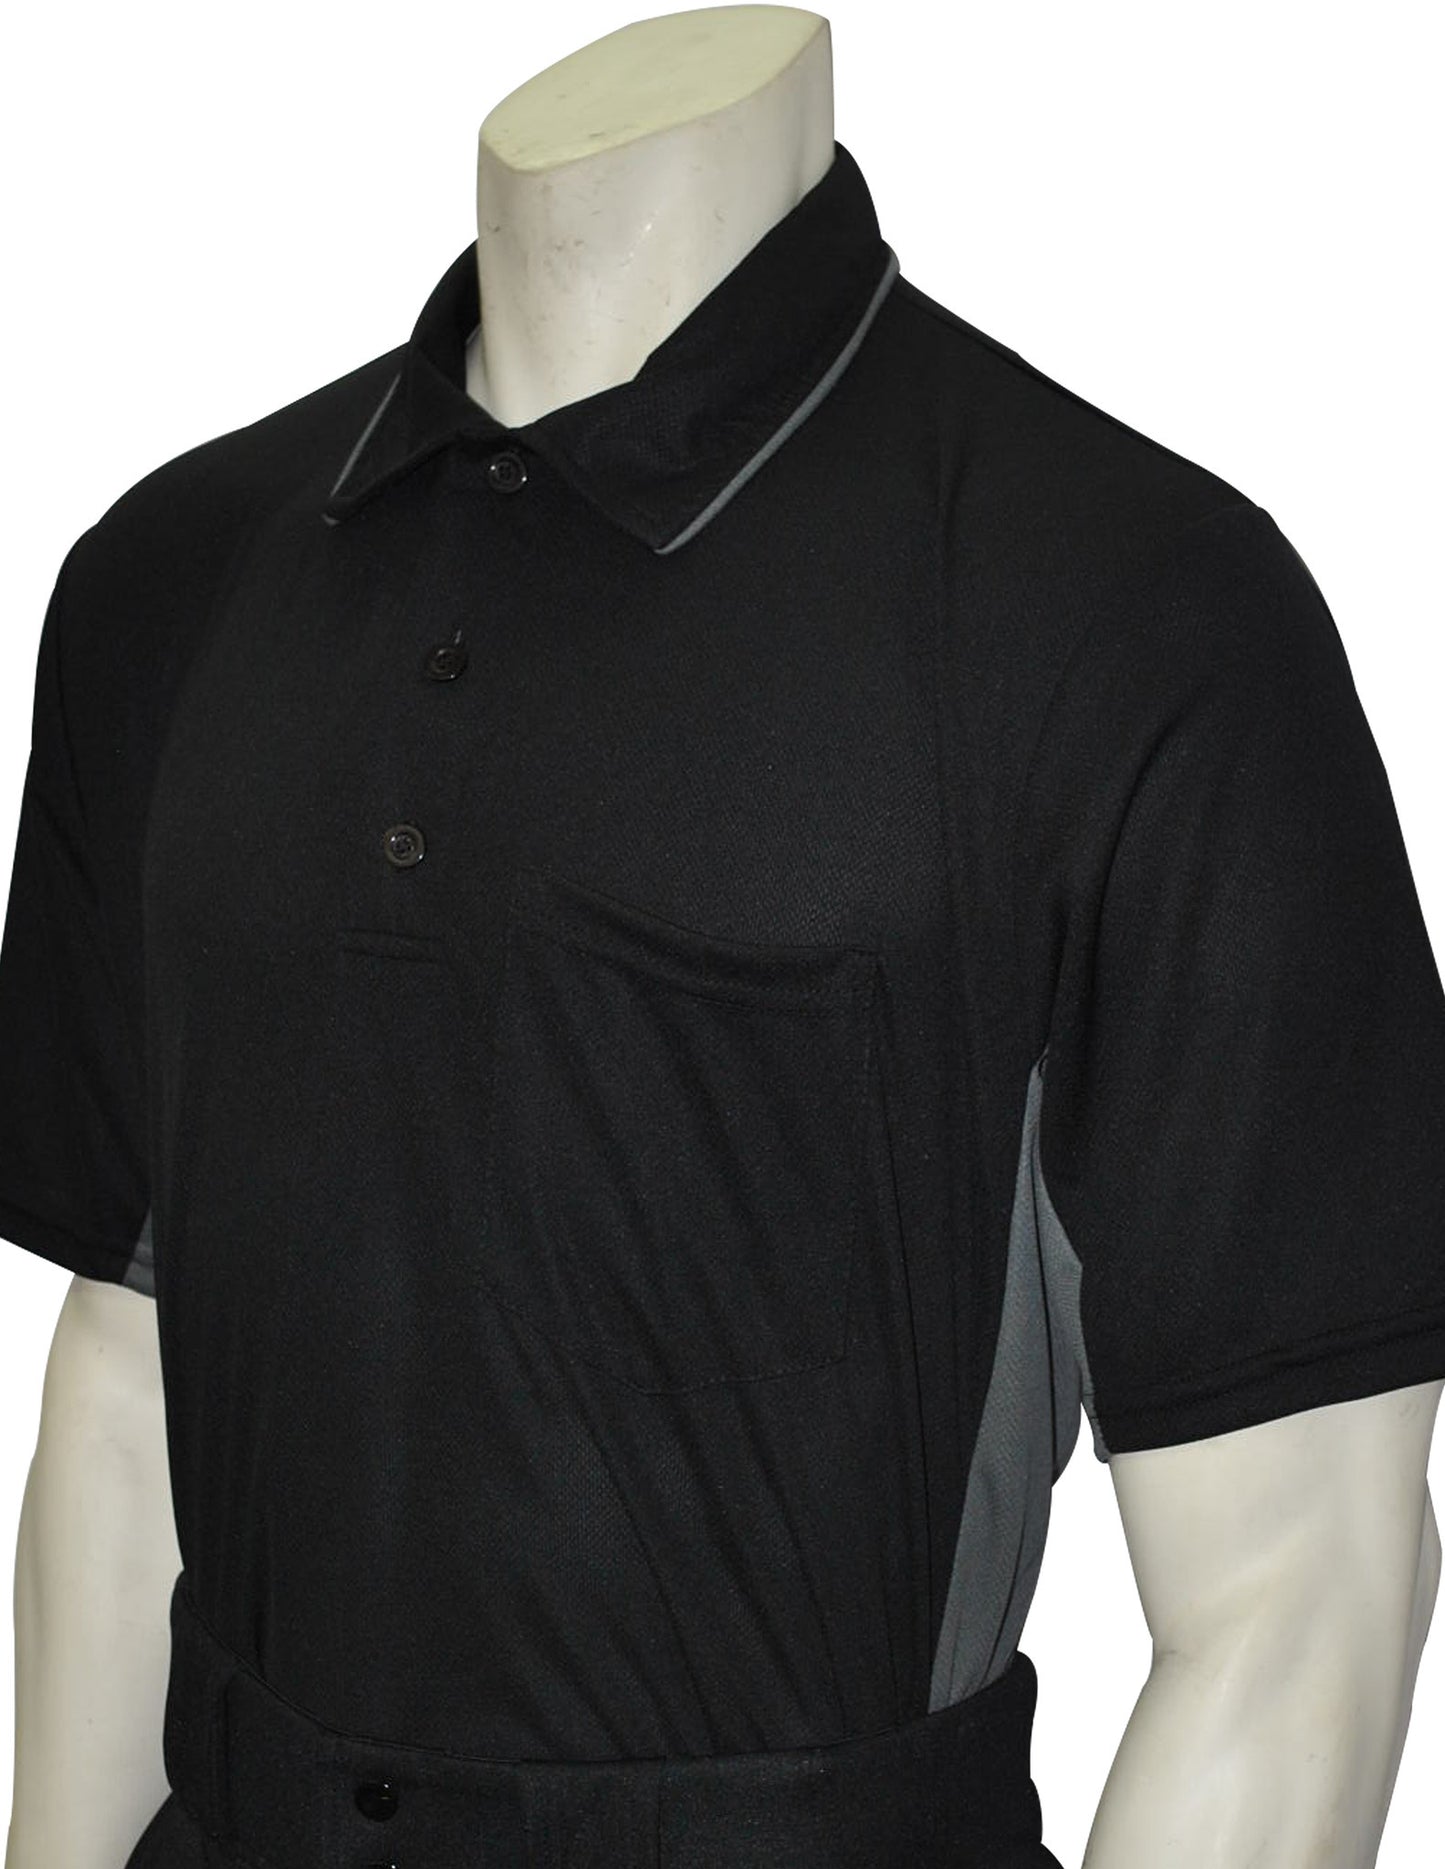 USA312 - Smitty Major League Style Umpire Shirt - Available in Black/Charcoal and Sky Blue/ Black and Charcoal/Black